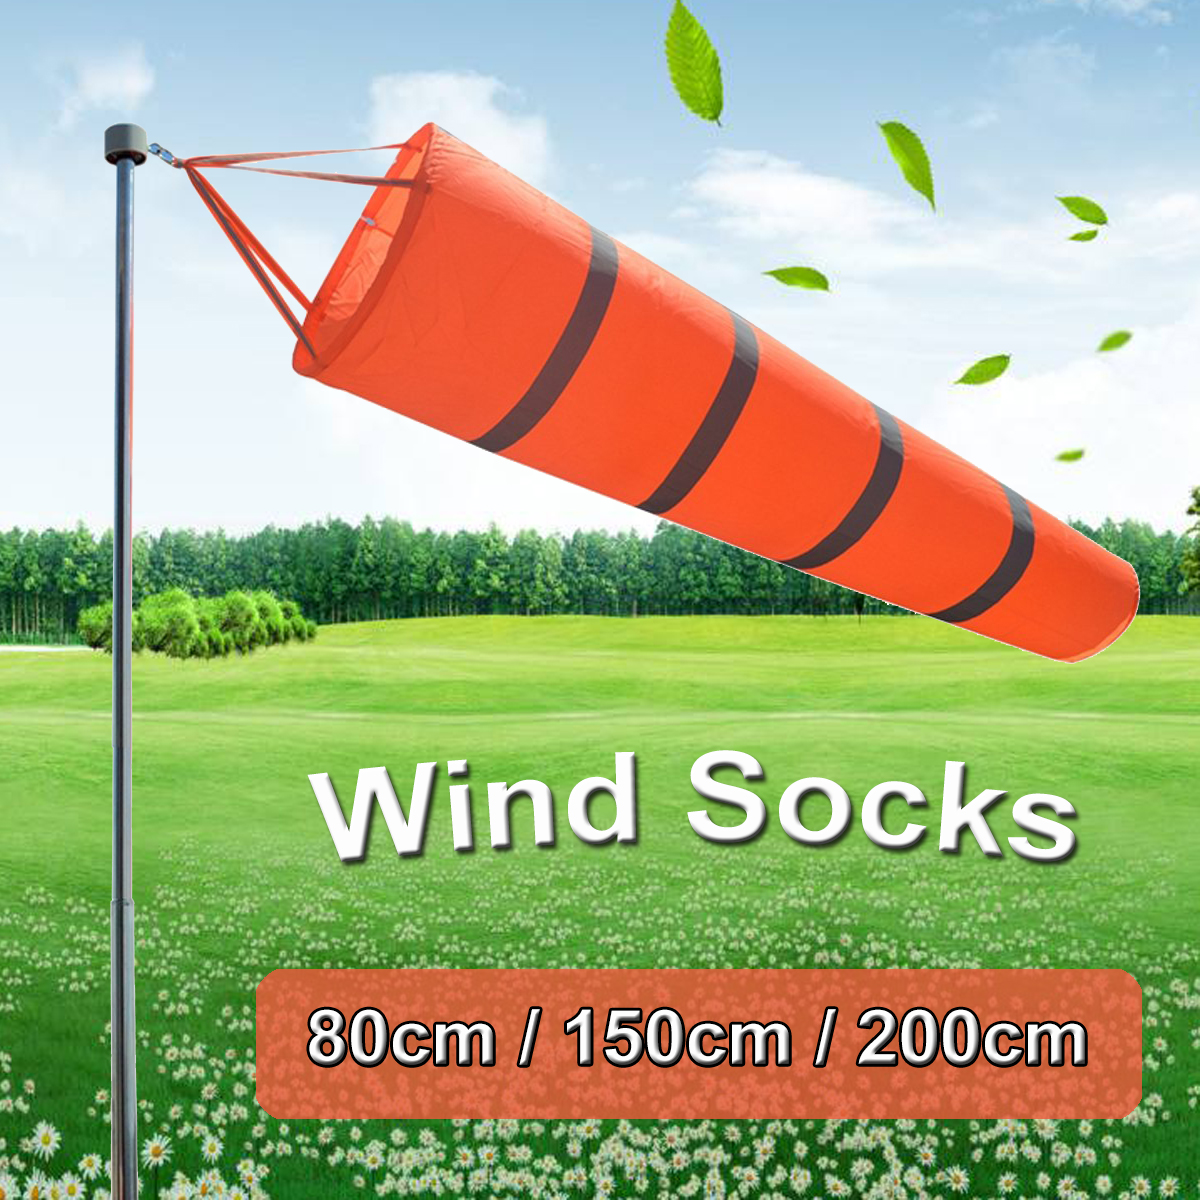 Reflective-Tape-Outdoor-Windsocks-Bag-Weather-Station-Flag-Belt-for-Airport-Garden-Patio-Lawn-Safety-1573310-1